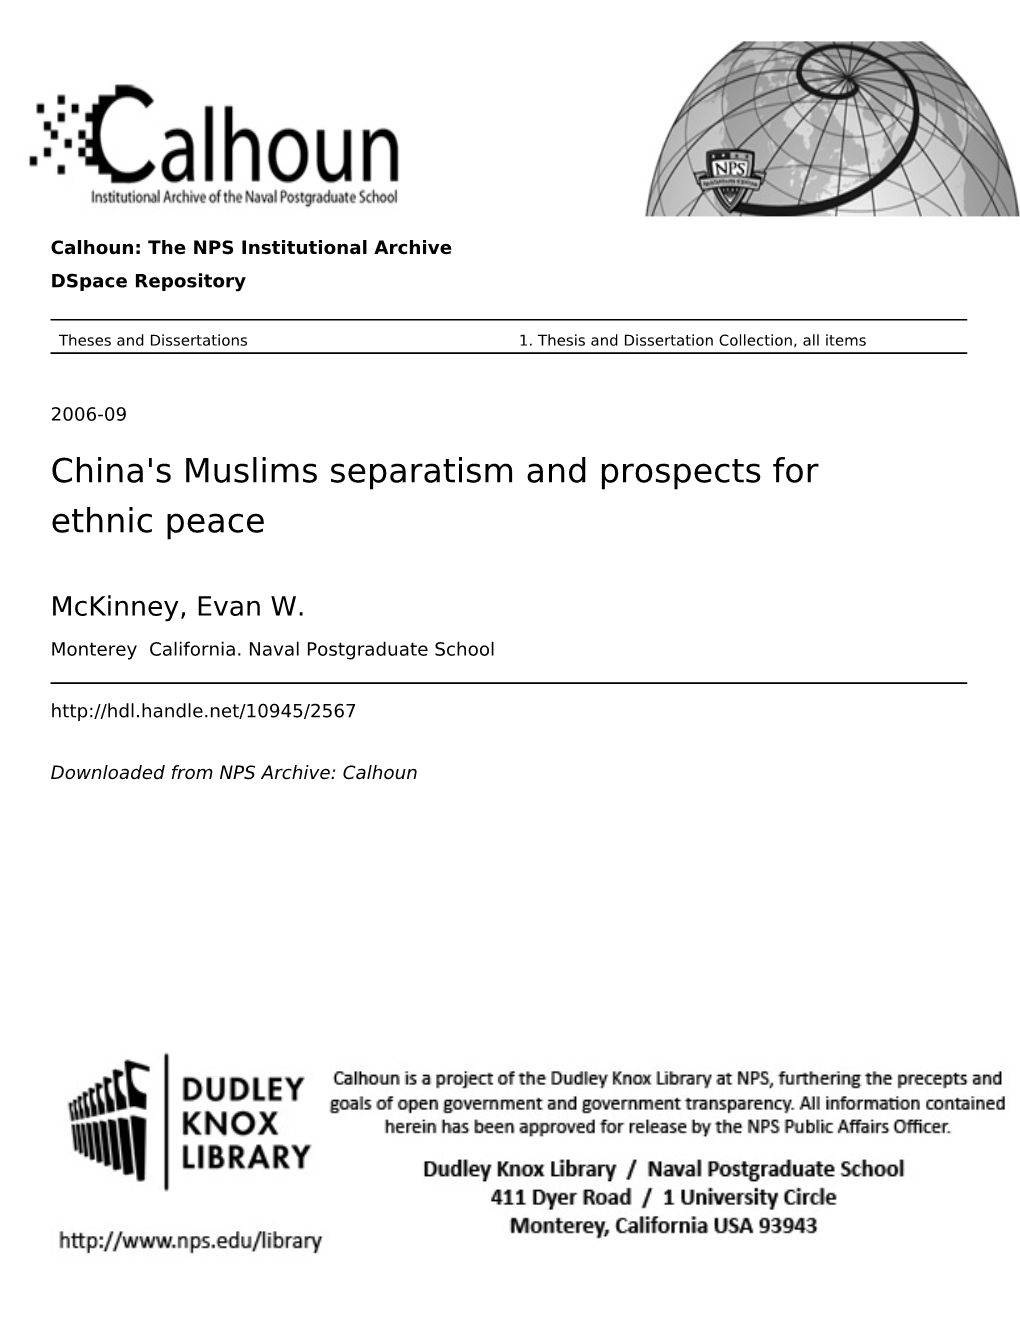 China's Muslims Separatism and Prospects for Ethnic Peace